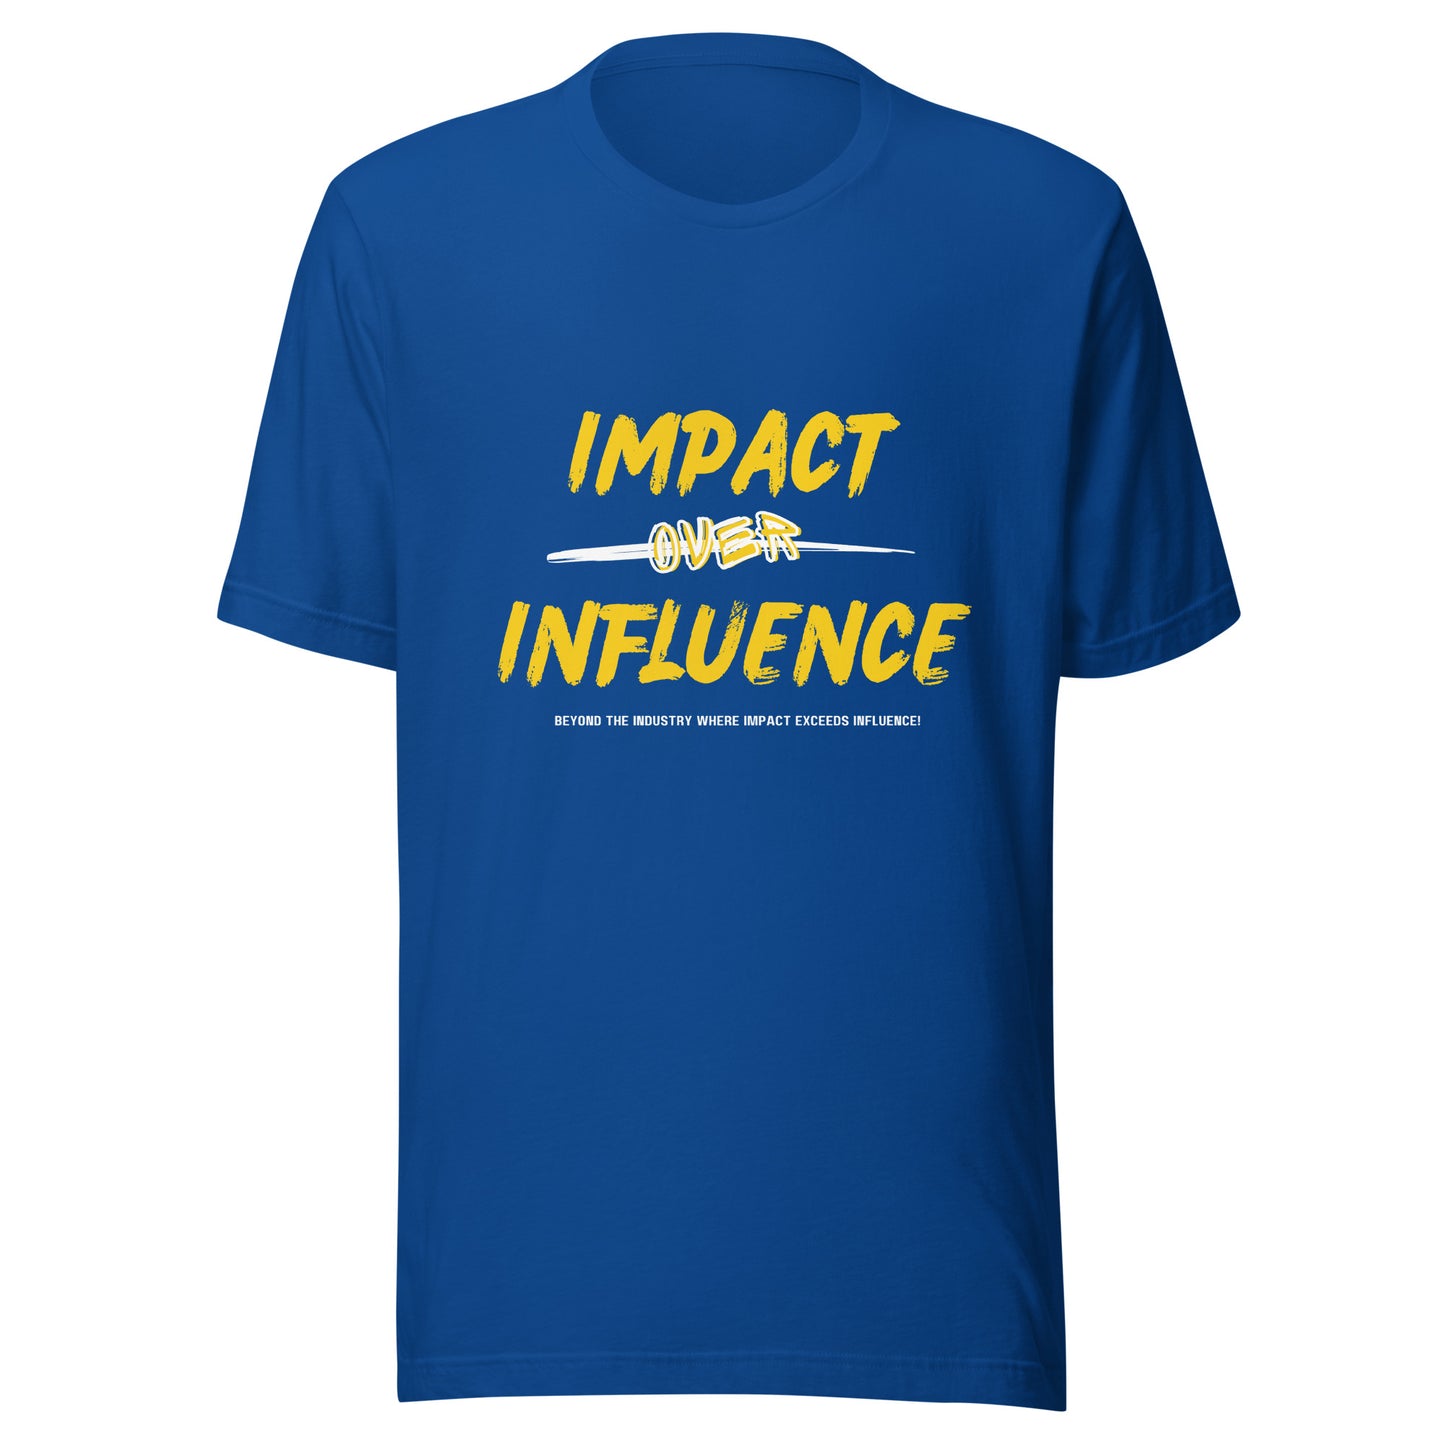 IMPACT OVER INFLUENCE (BLUE/YELLOW)